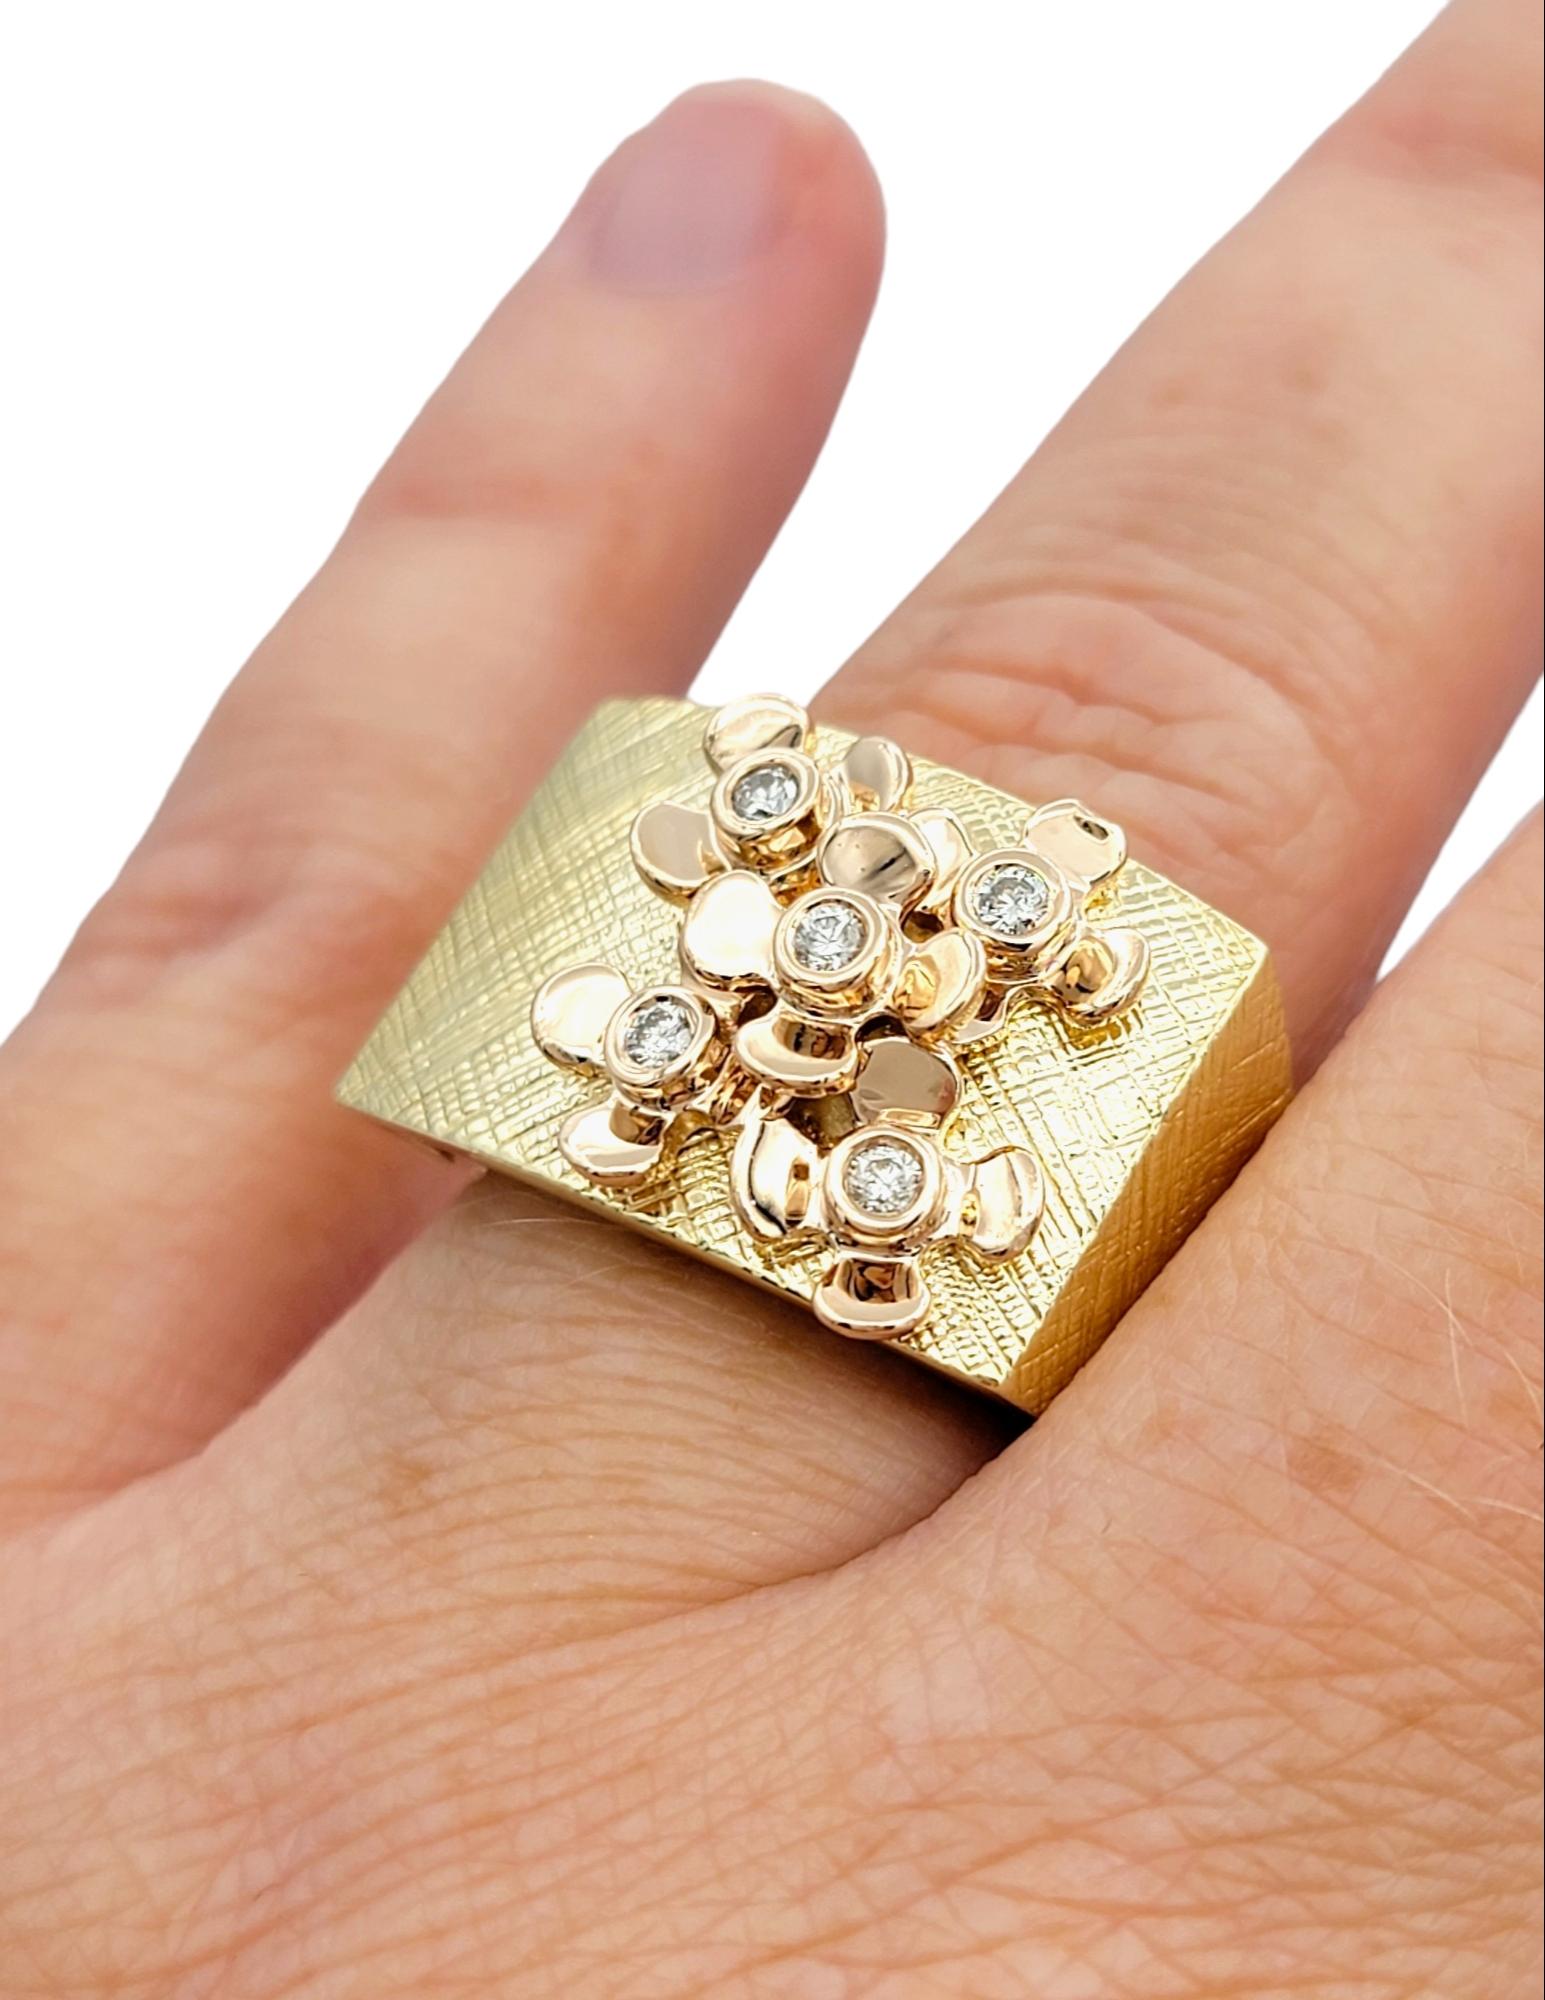 Sonia B. Designs Two-Tone Gold Cocktail Ring with Diamond Accented Flower Motif For Sale 2